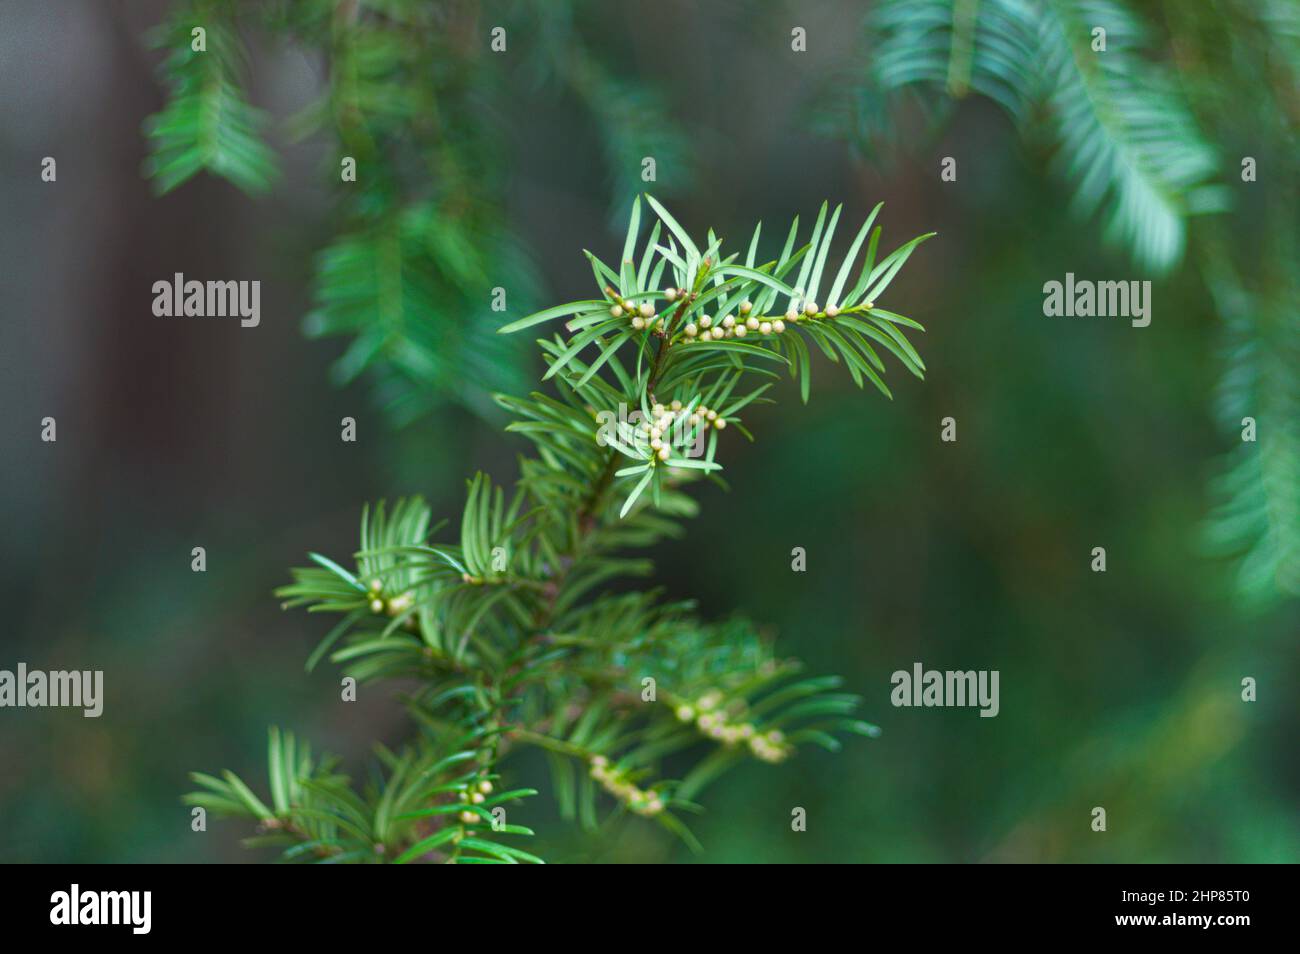 Closeup of Abies holophylla tree branch Stock Photo